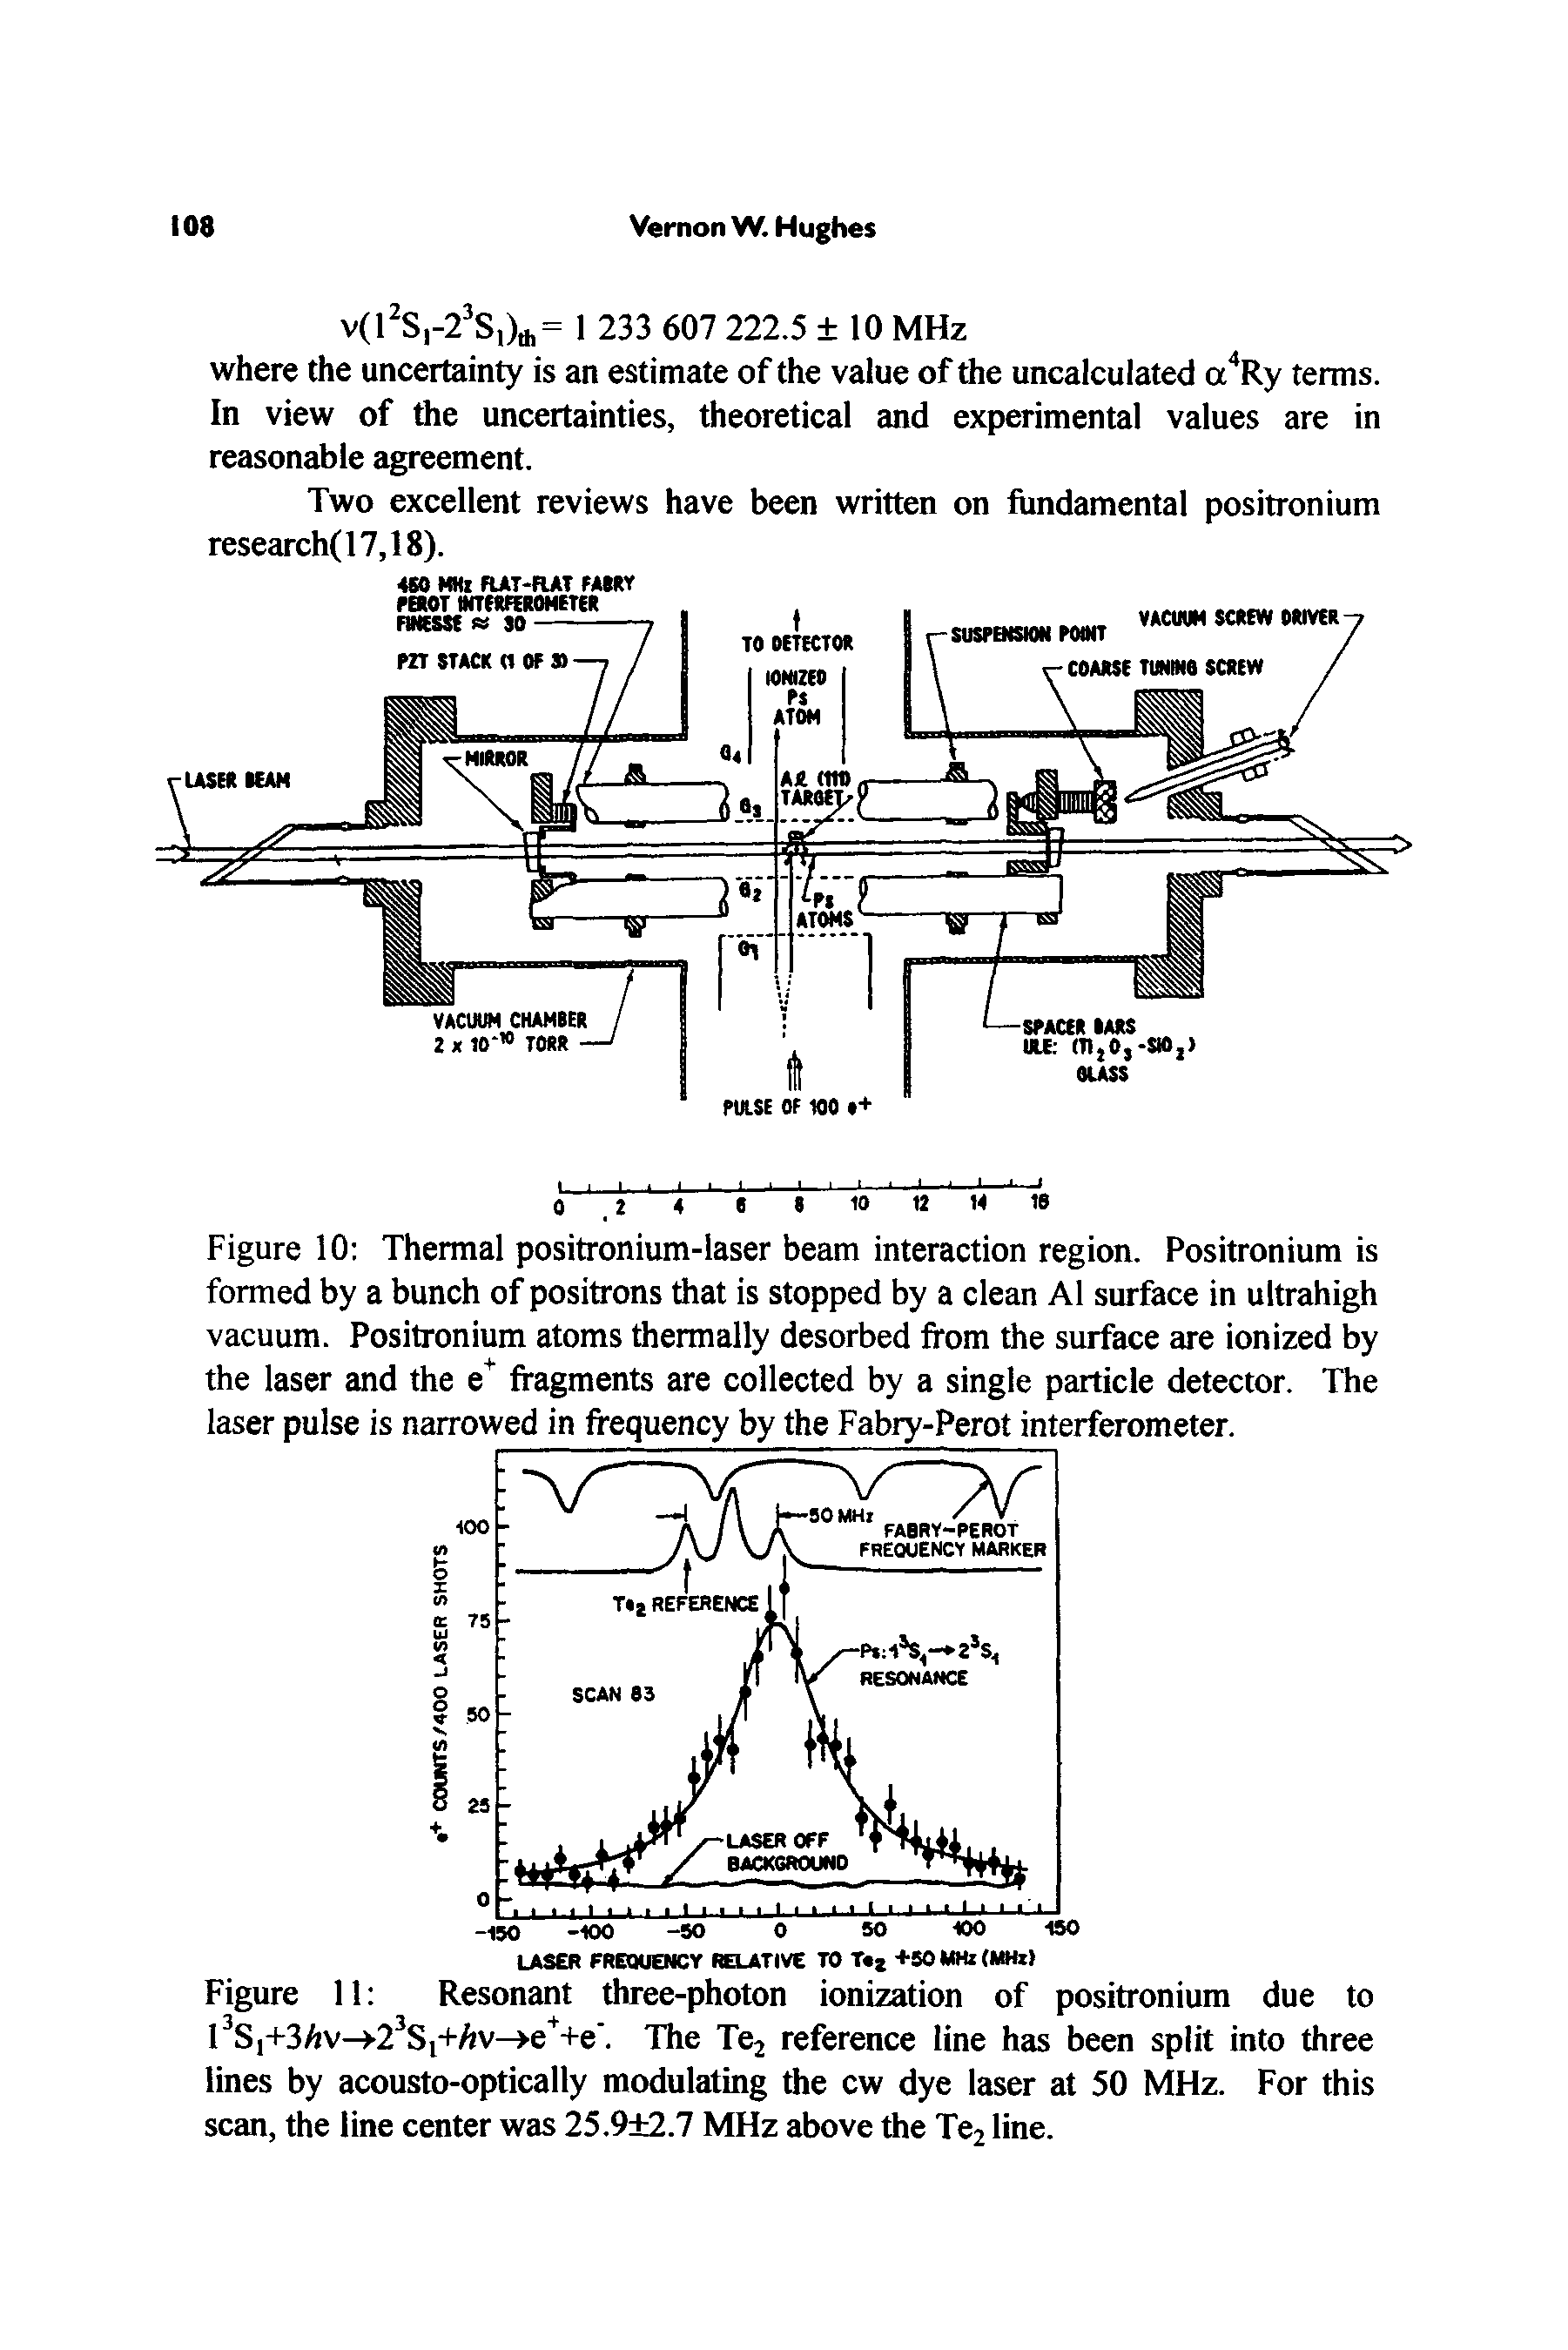 Figure 11 Resonant three-photon ionization of positronium due to l S,+3/jv->2 Si+/ v->e +e . The Te2 reference tine has been split into three lines by acousto-optically modulating the cw dye laser at 50 MHz. For this scan, the line center was 25.9+2.7 MHz above the Te2 line.